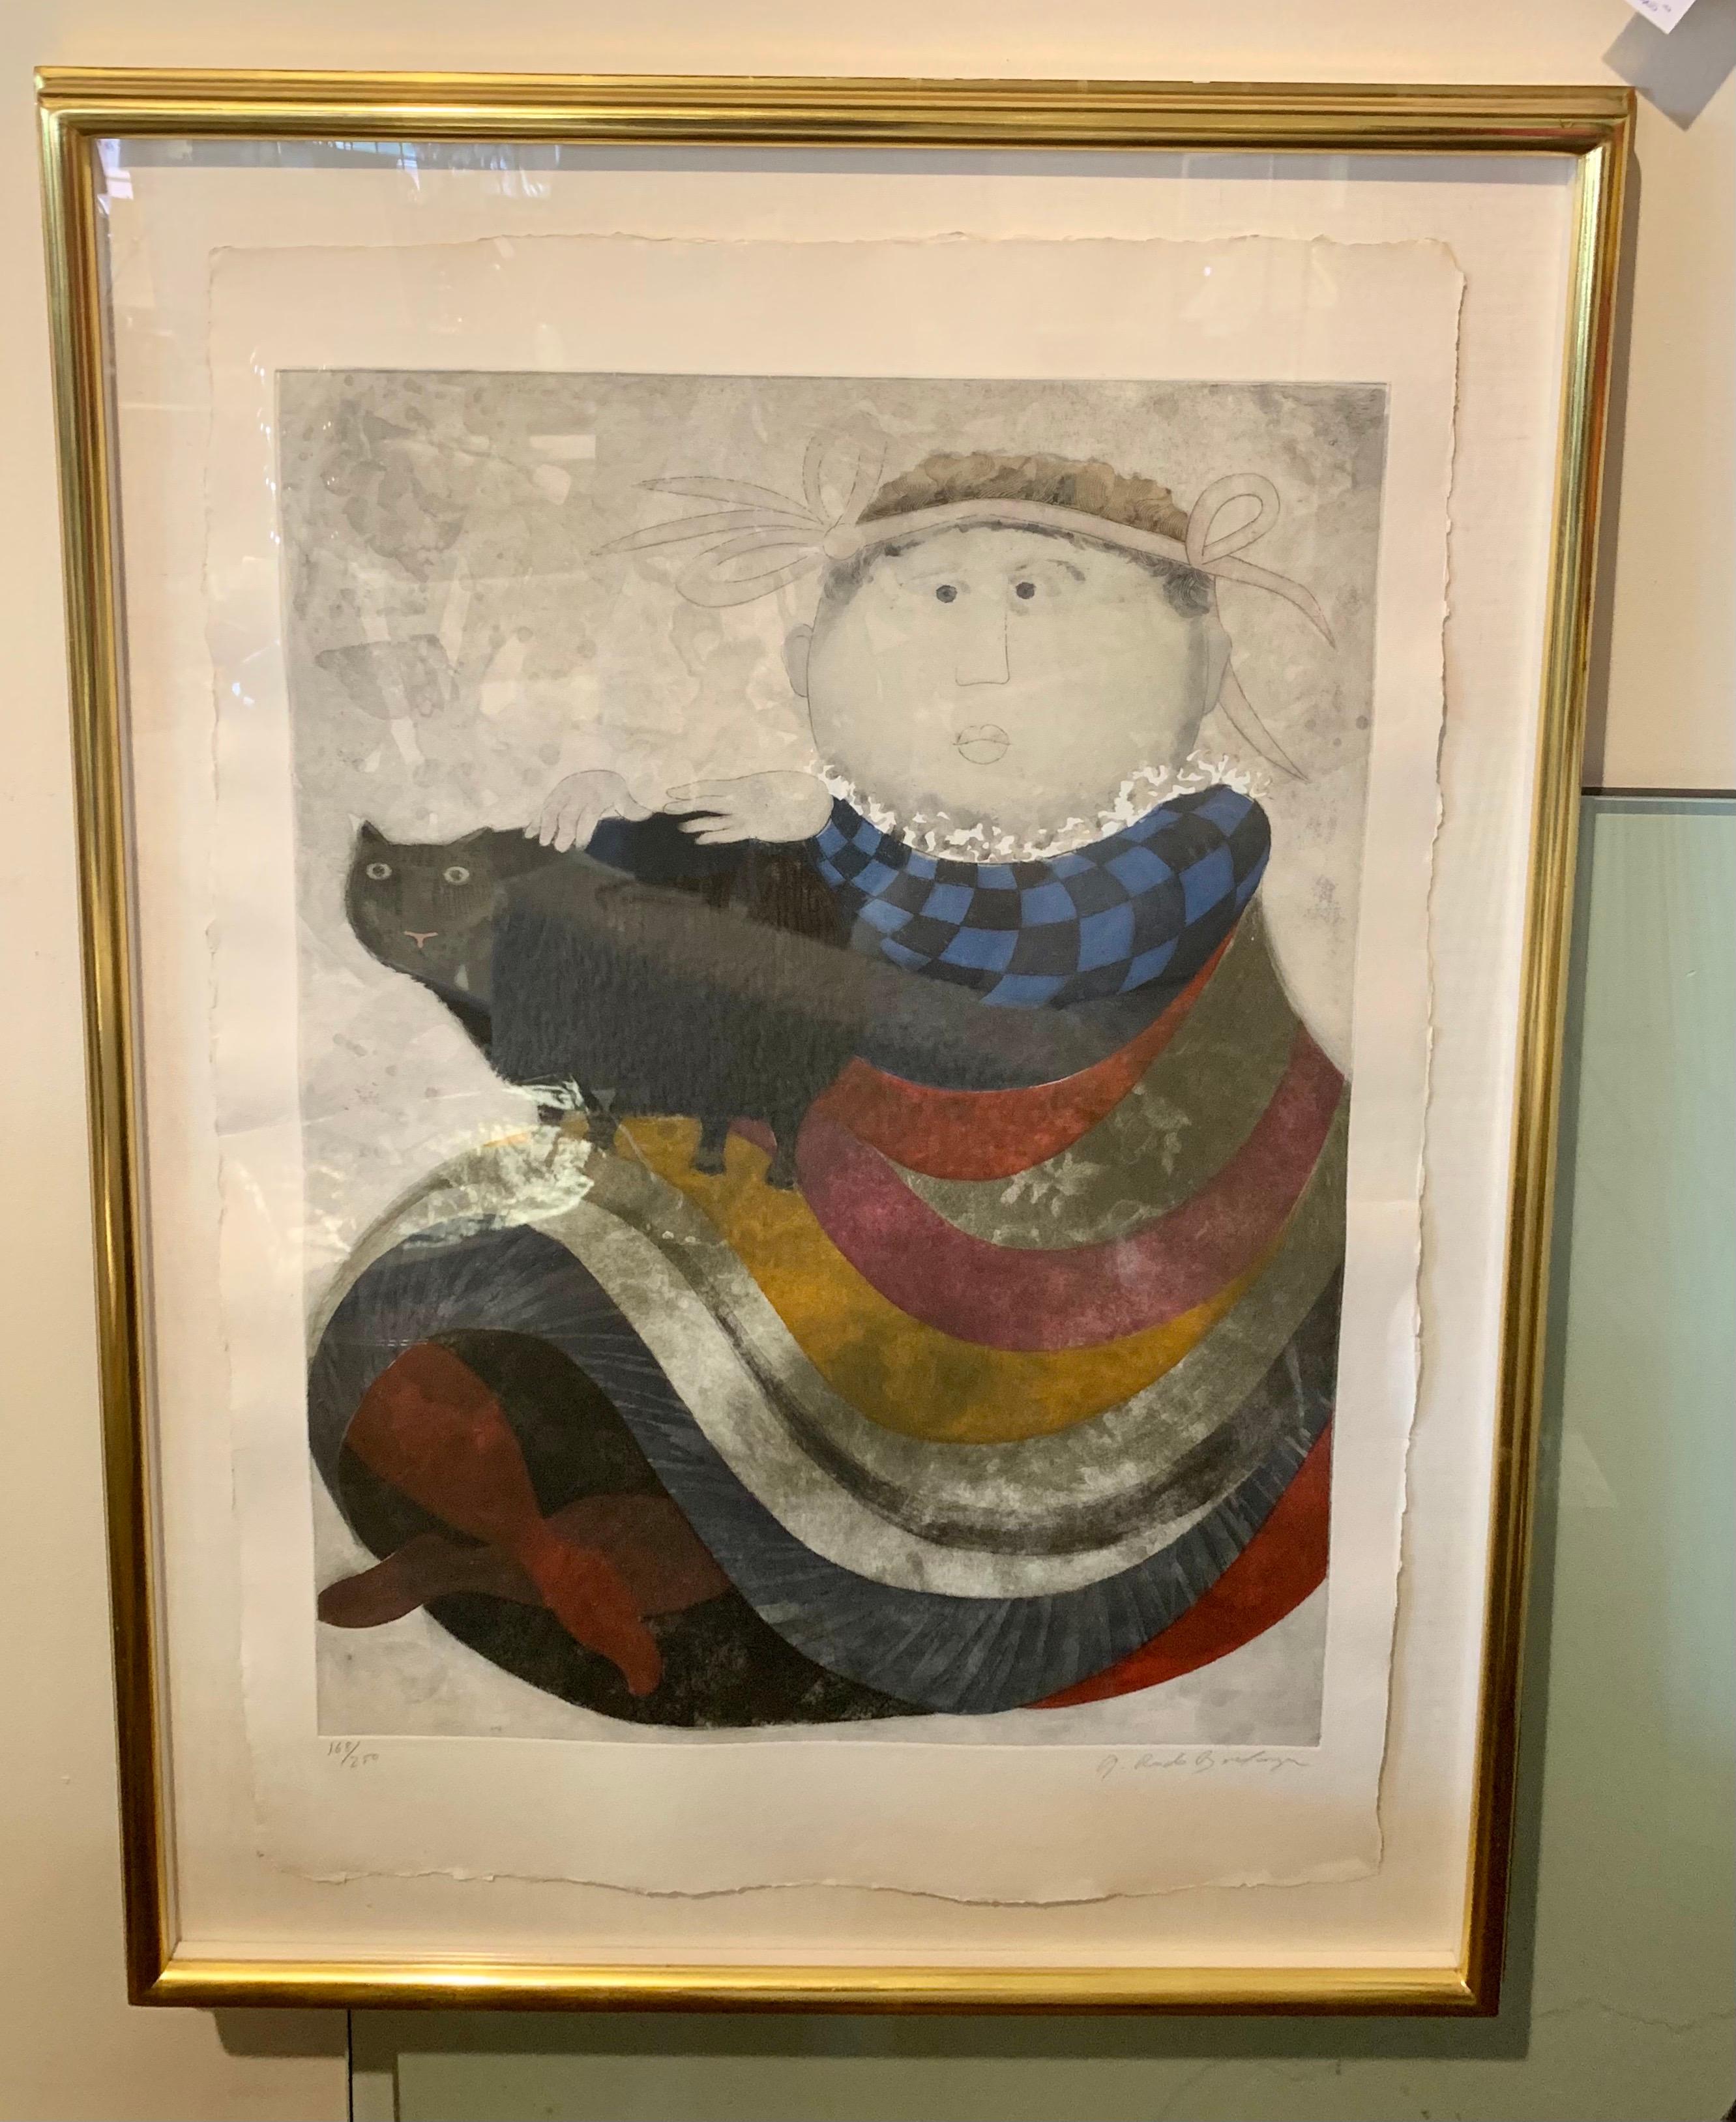 Depicting a girl with her cat. Signed and numbered by the artist. Boulanger (1935, Bolivia) is a Bolivian artist best known for her whimsical works depicting children. Edition 168 of 250. Signed in pencil as shown.
Includes 200 page coffee table